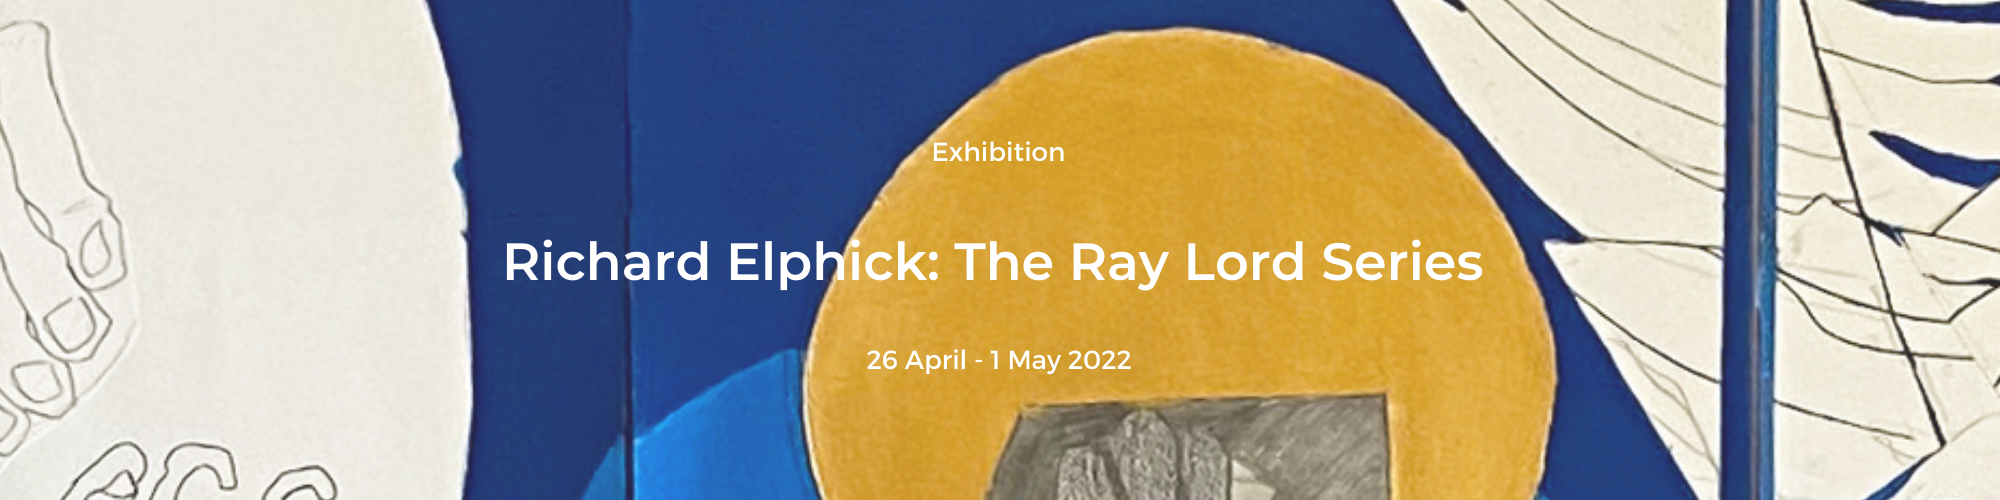 Richard Elphick: The Ray Lord Series